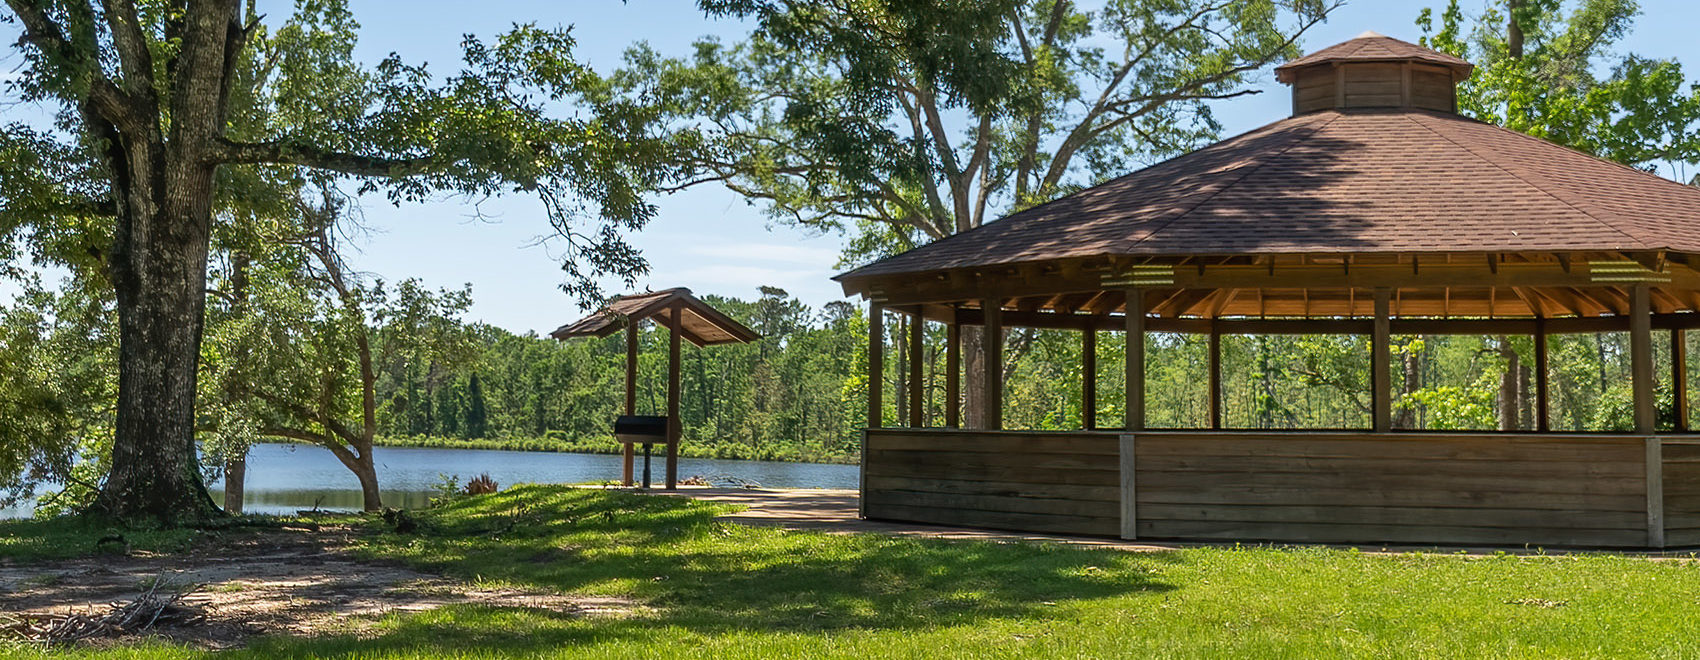 Pavilion and pond at site of Louisiana sawmill at Fullerton